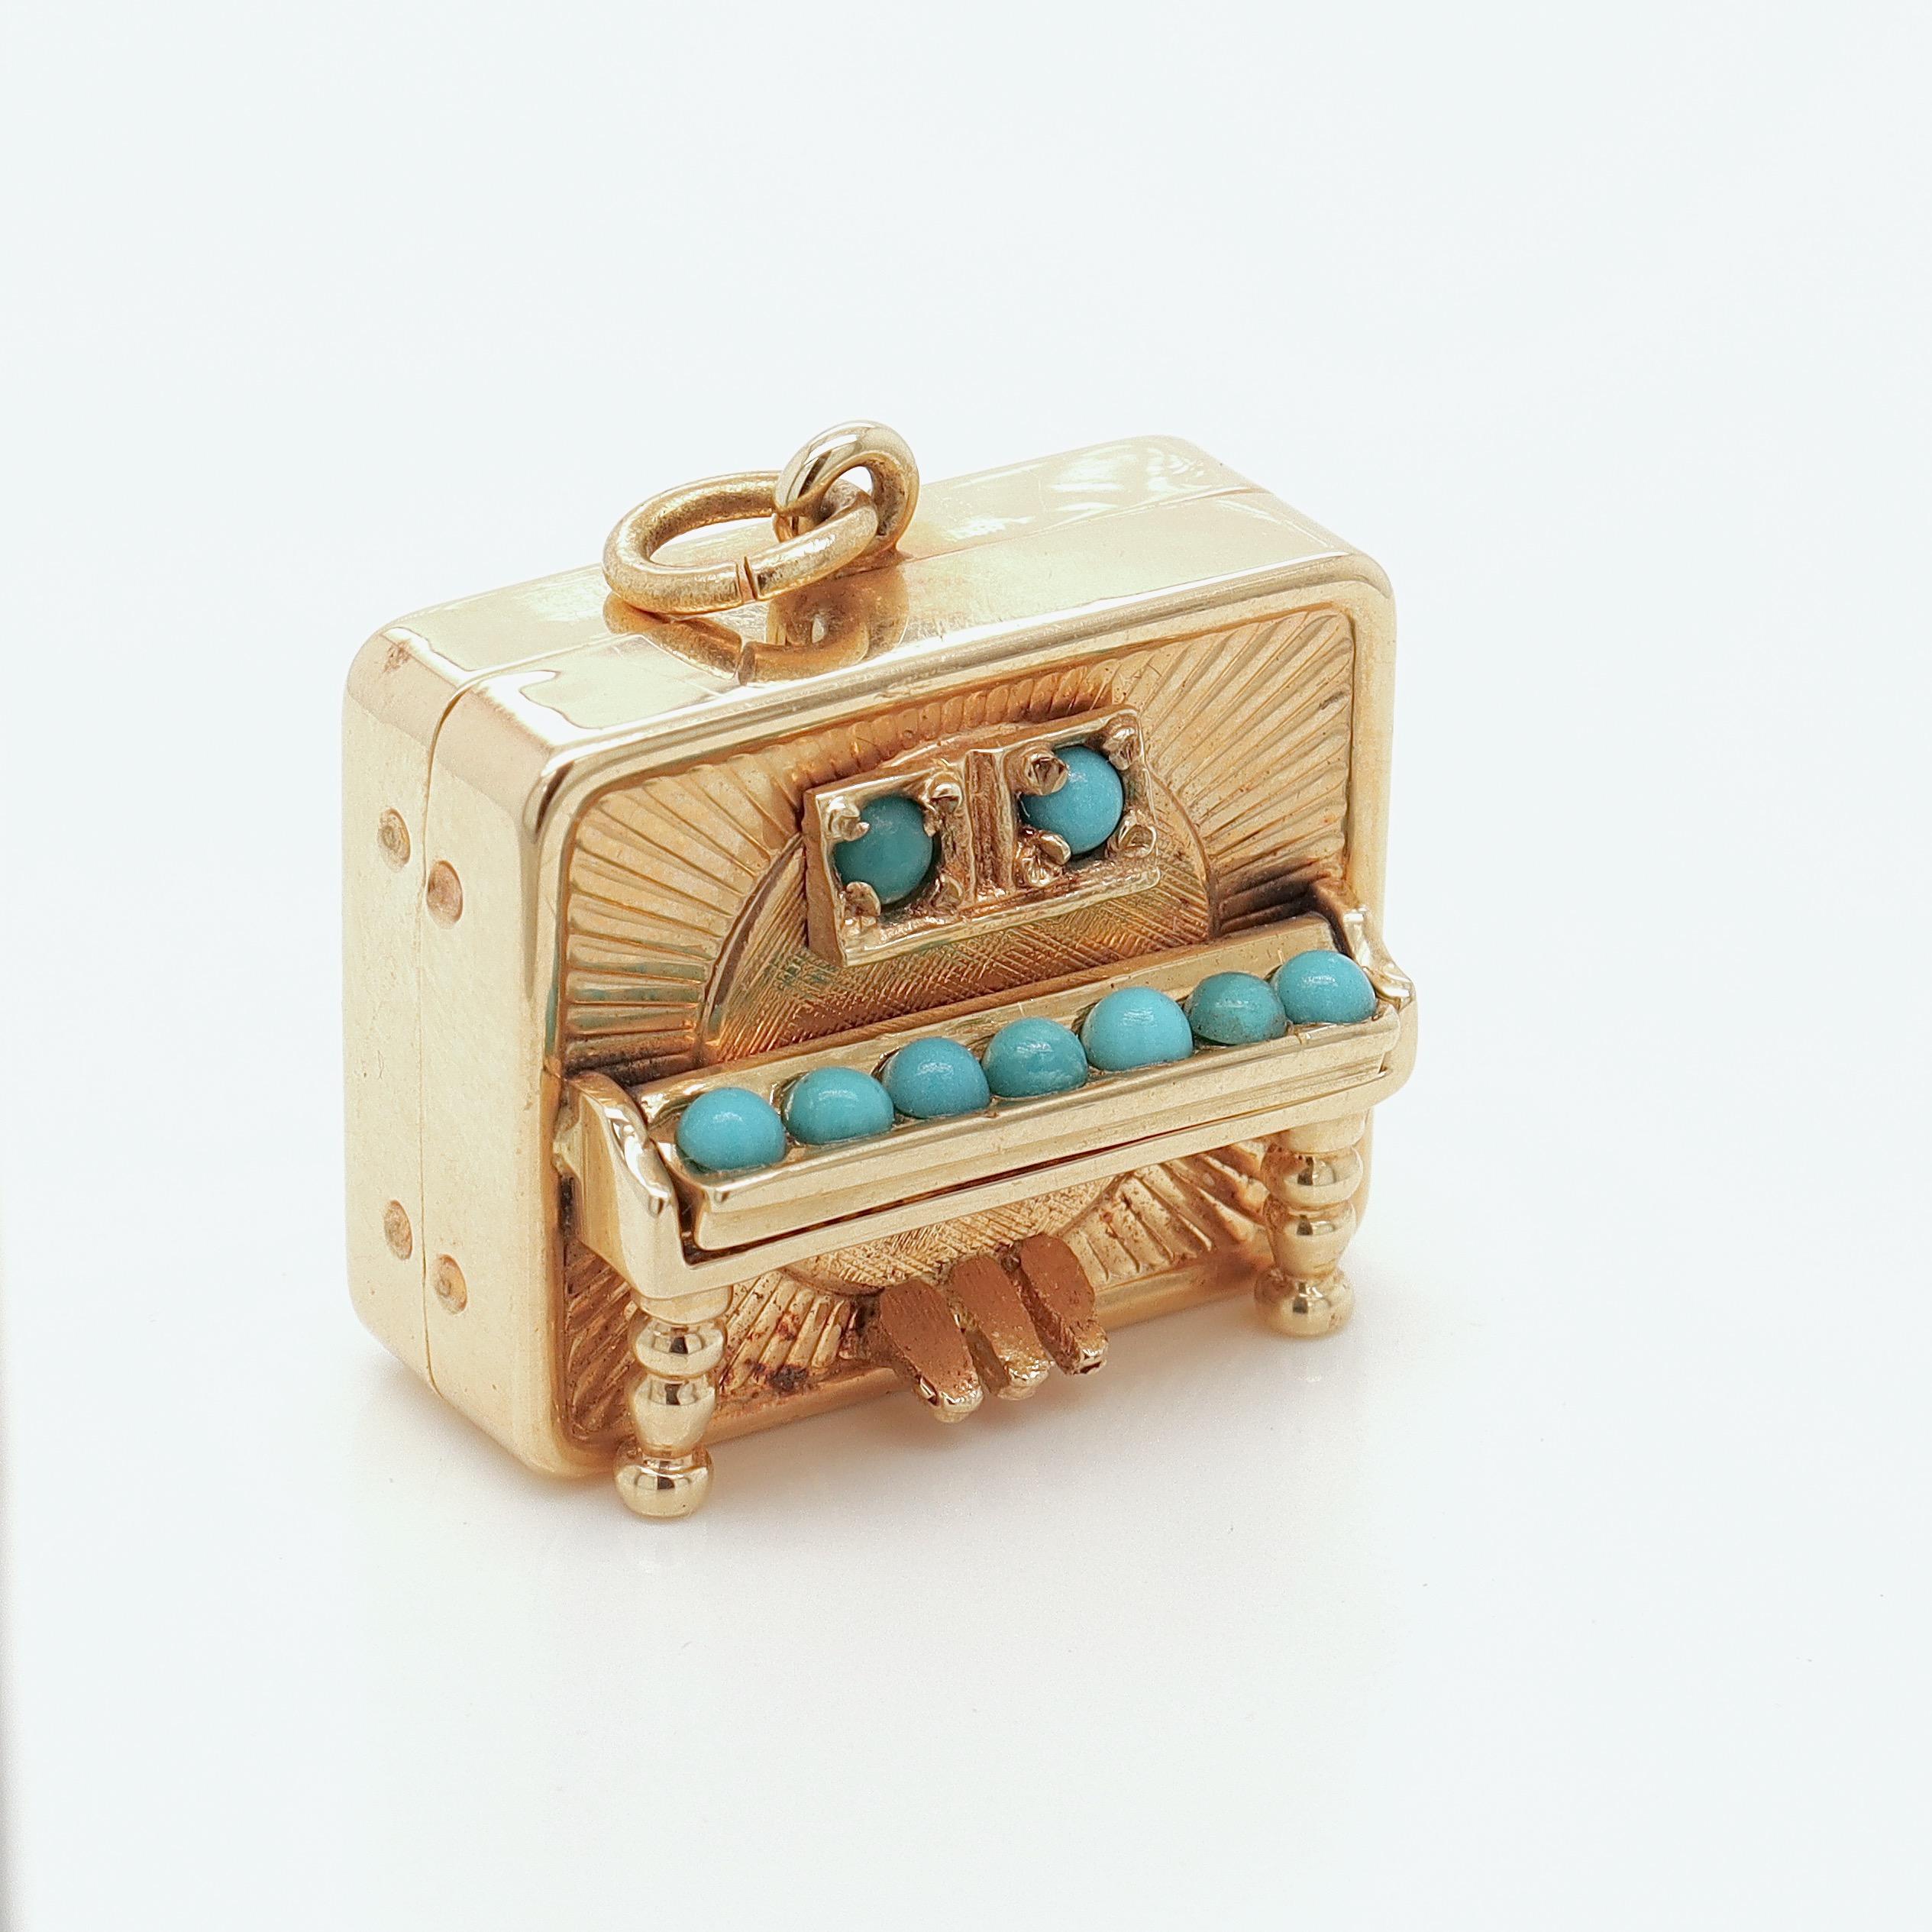 Mid-Century 14K Gold & Turquoise Mechanical Musical Piano Charm for a Bracelet 2